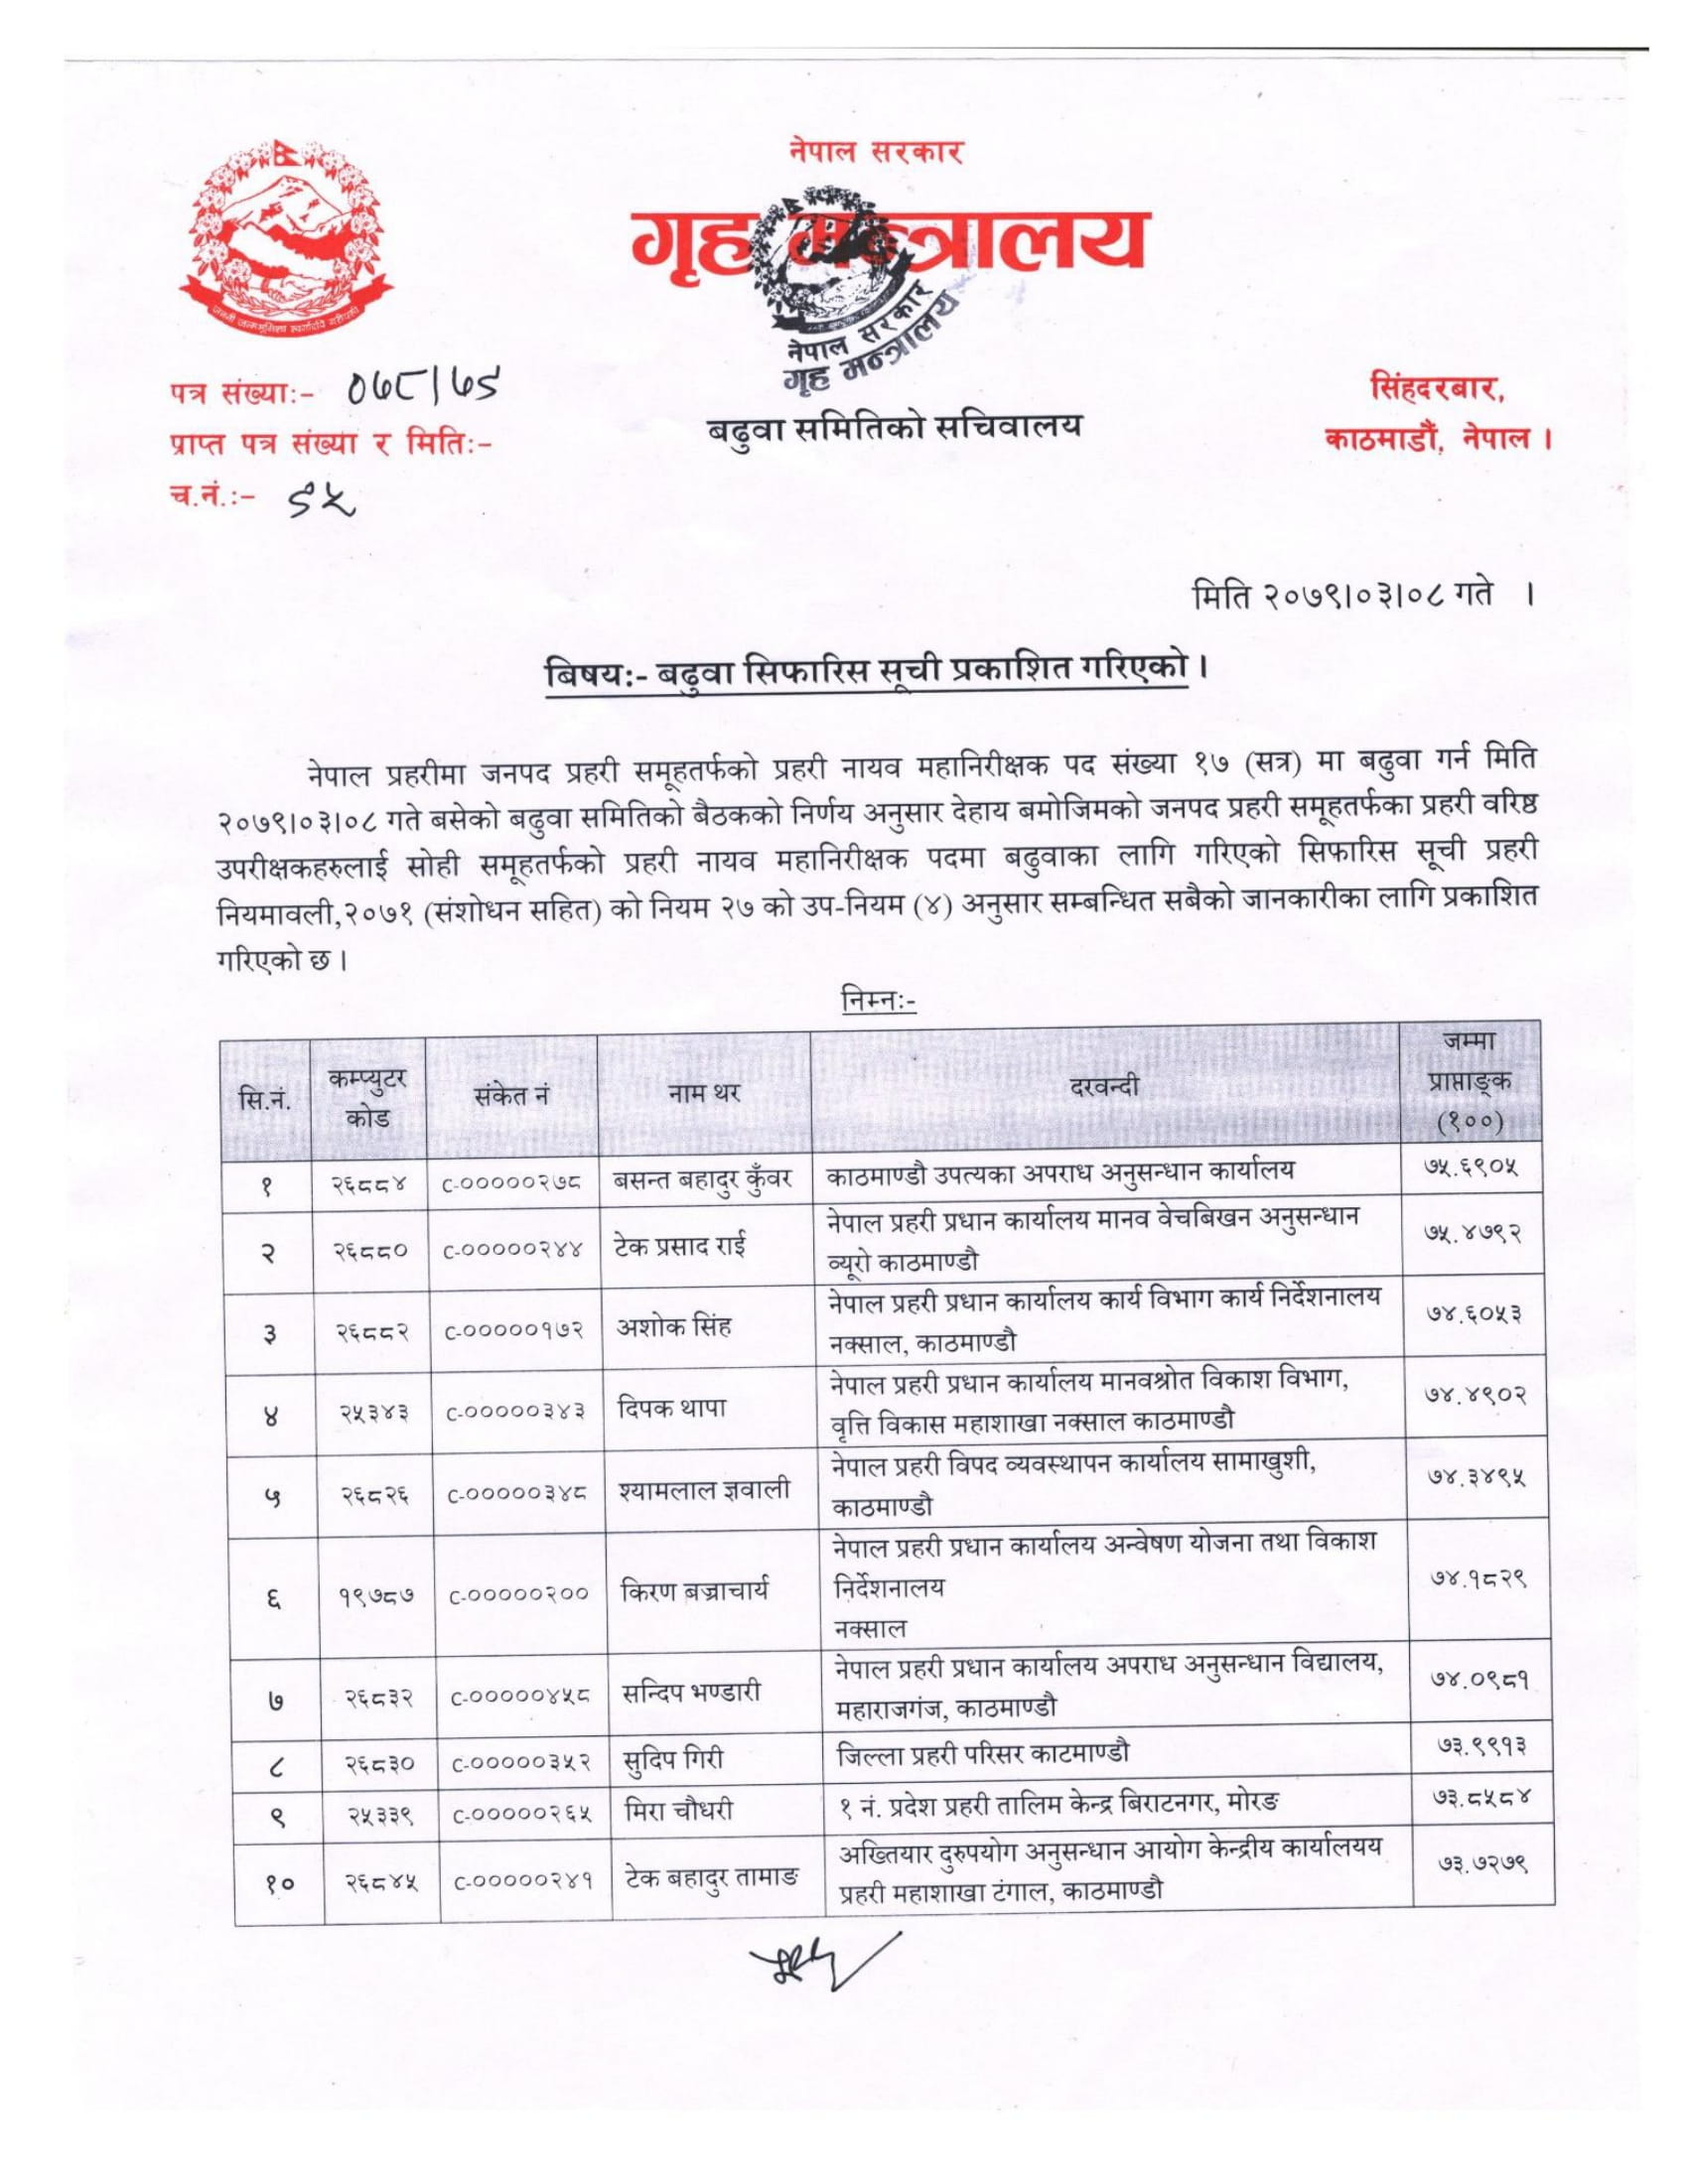 Nepal Police DIG Promotion Recommend List (2079-03-08)